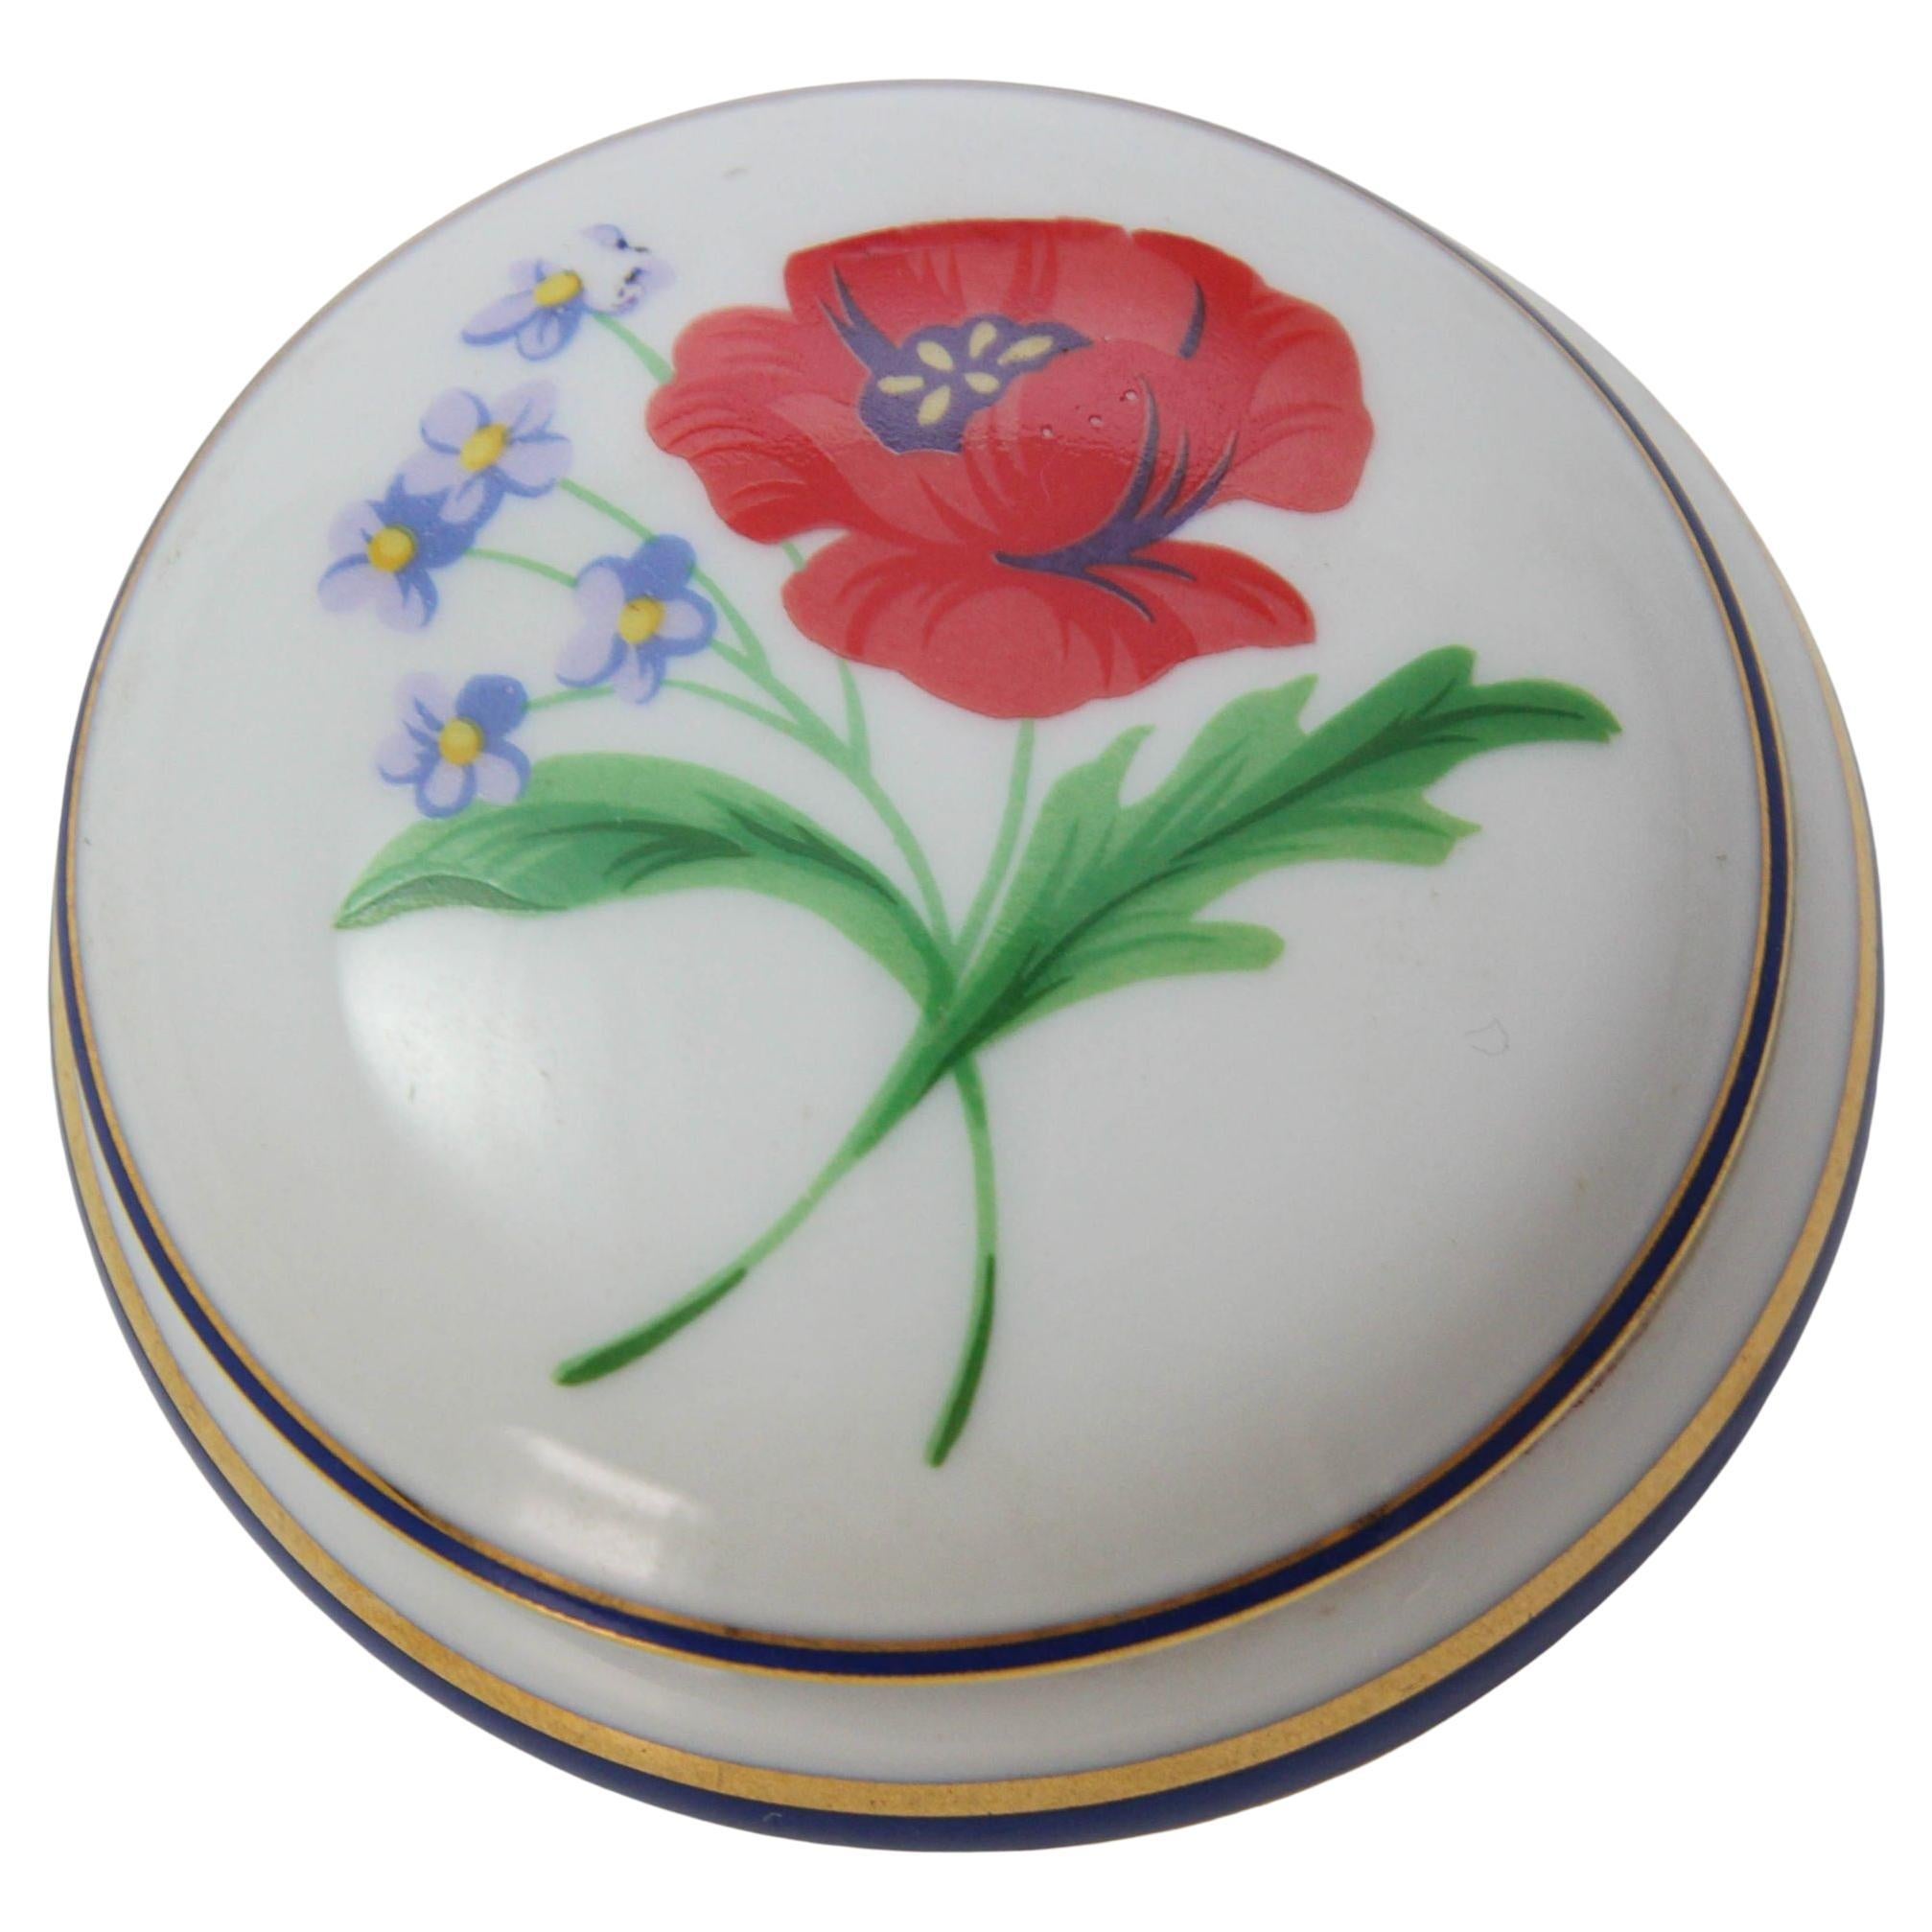 Tiffany & Co. Limoges France American Garden Round Porcelain Collectible Box